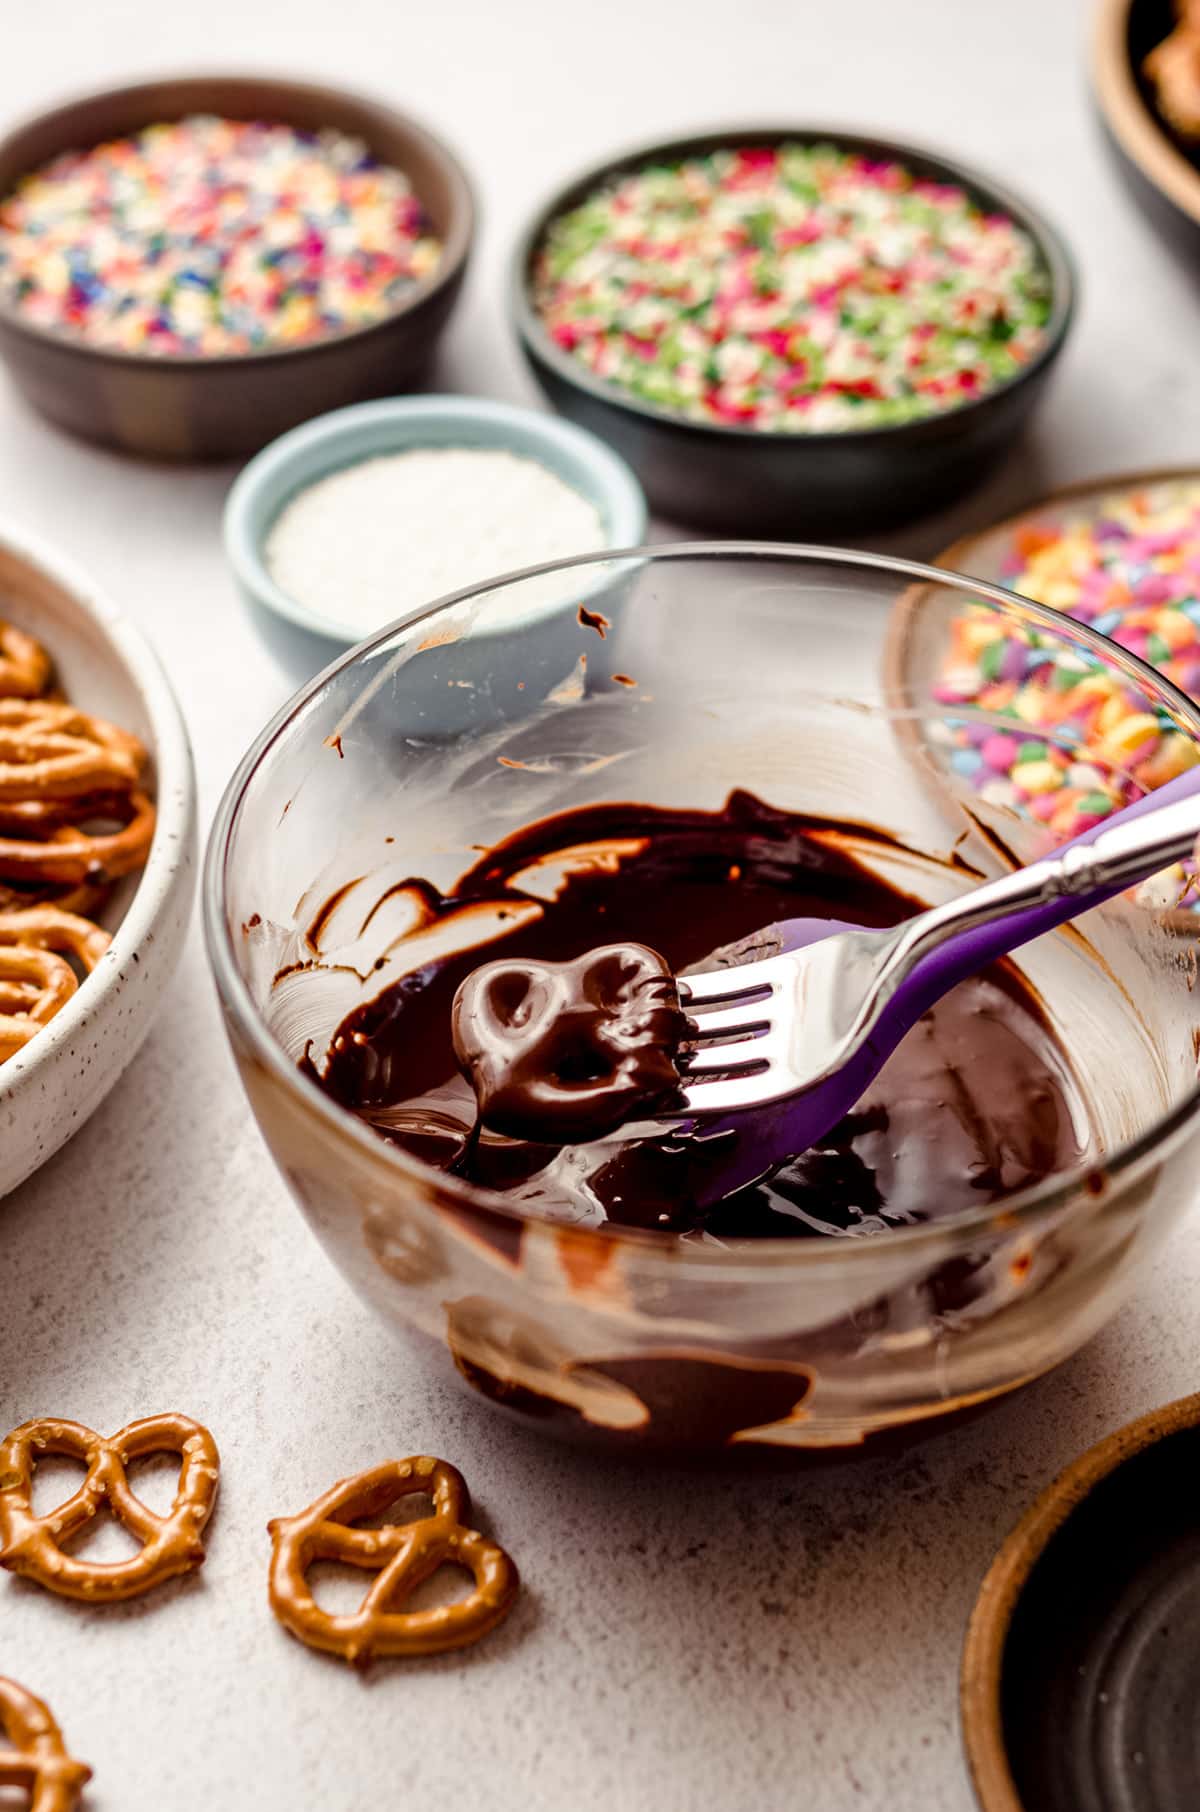 using a fork to dip mini pretzels in melted chocolate